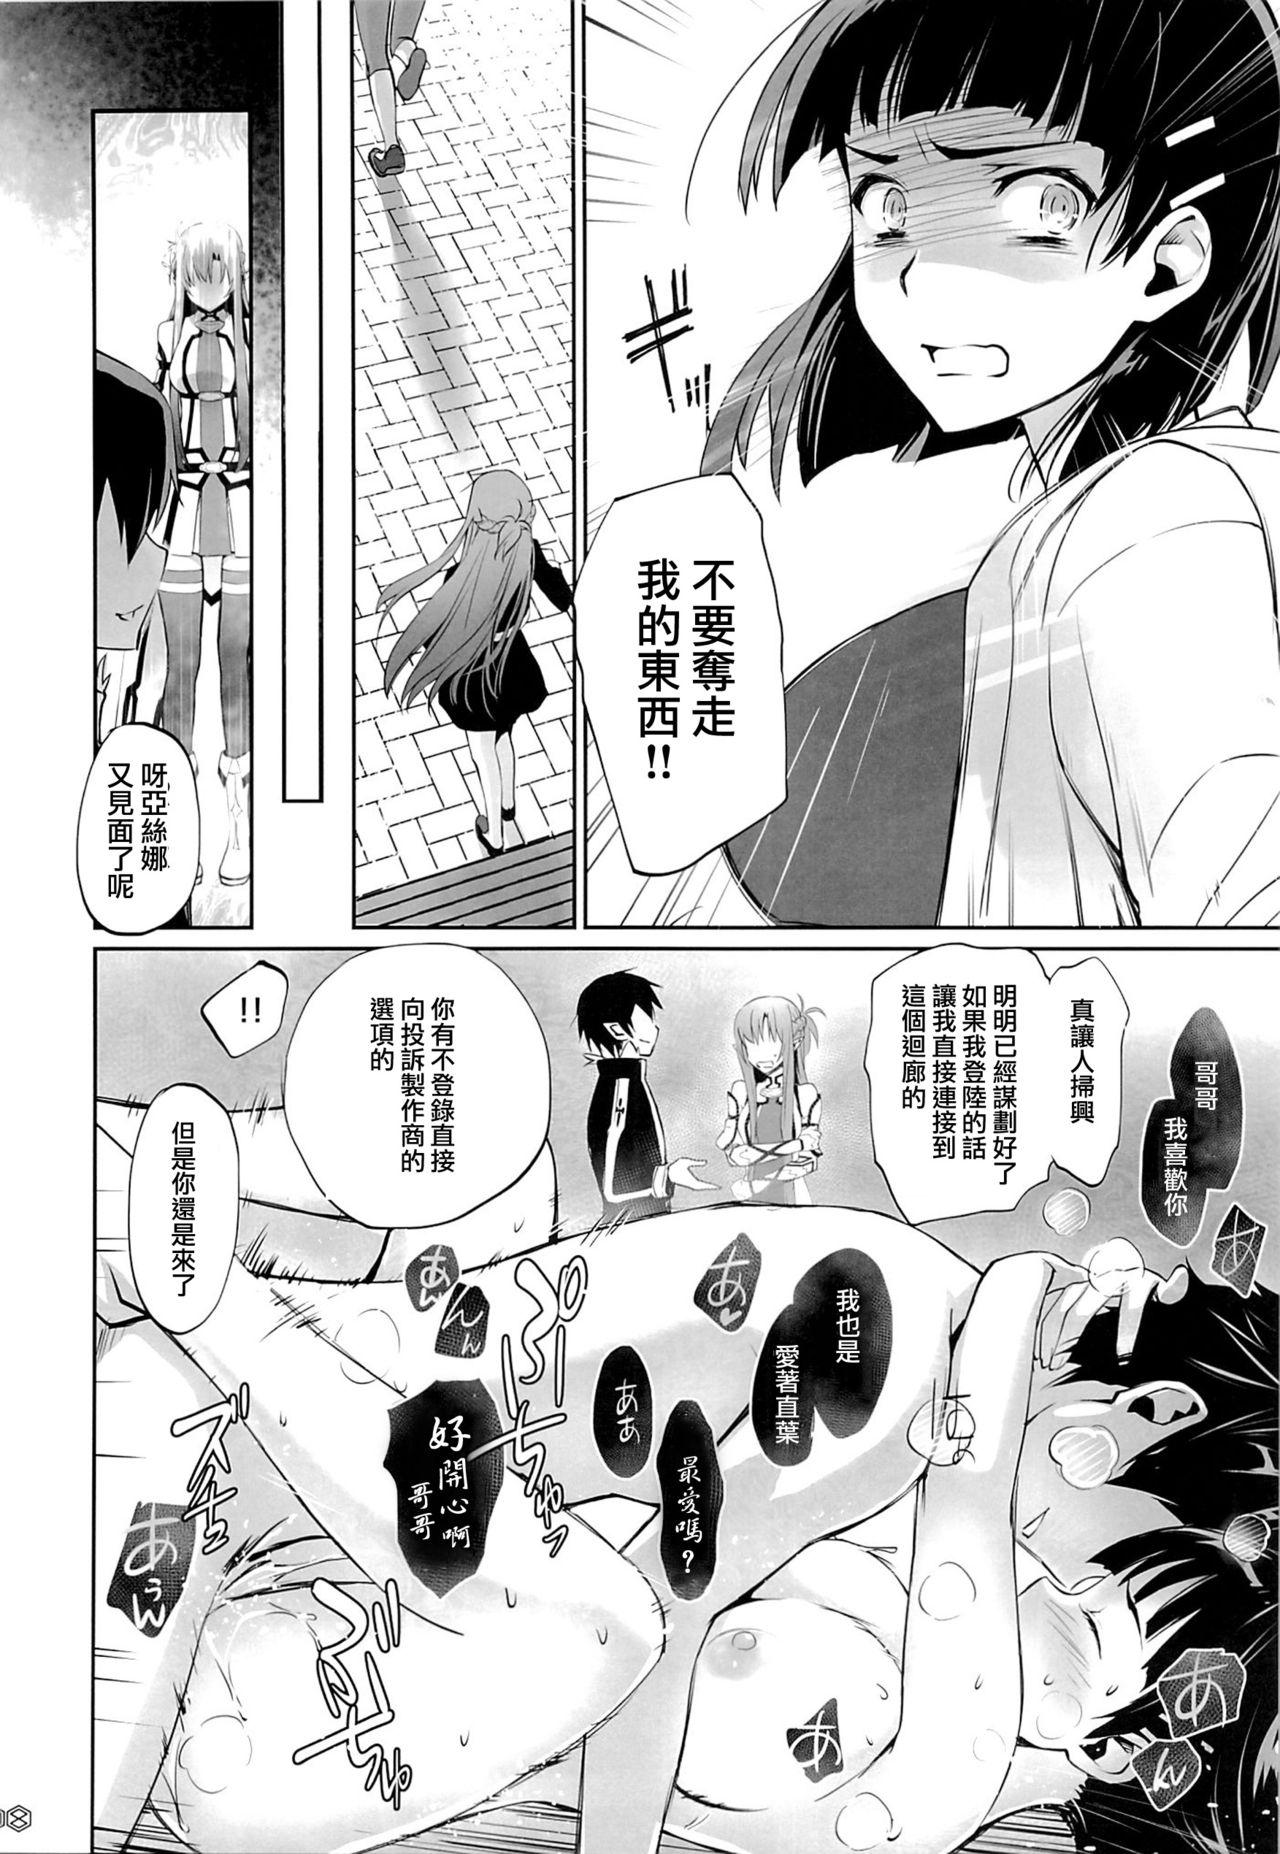 Gay 3some turnover - Sword art online Kinky - Page 7